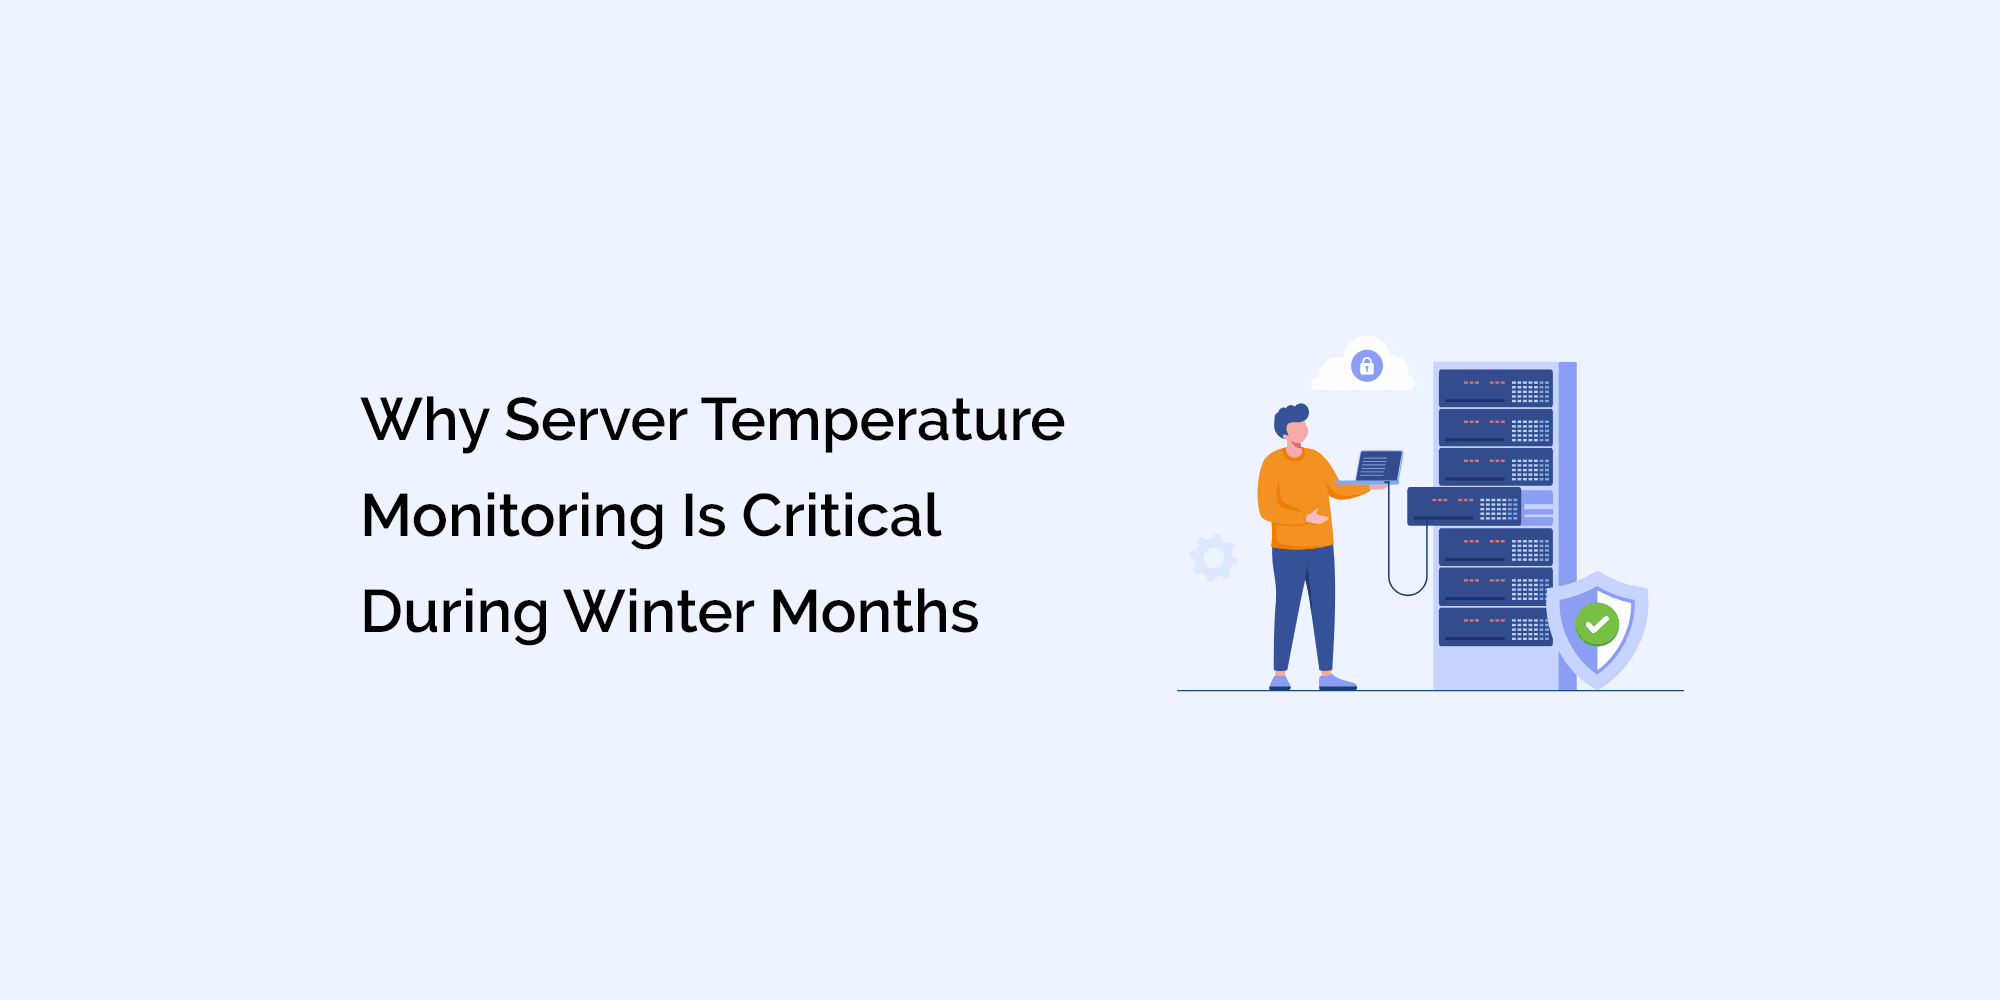 Why Server Temperature Monitoring Is Critical During Winter Months